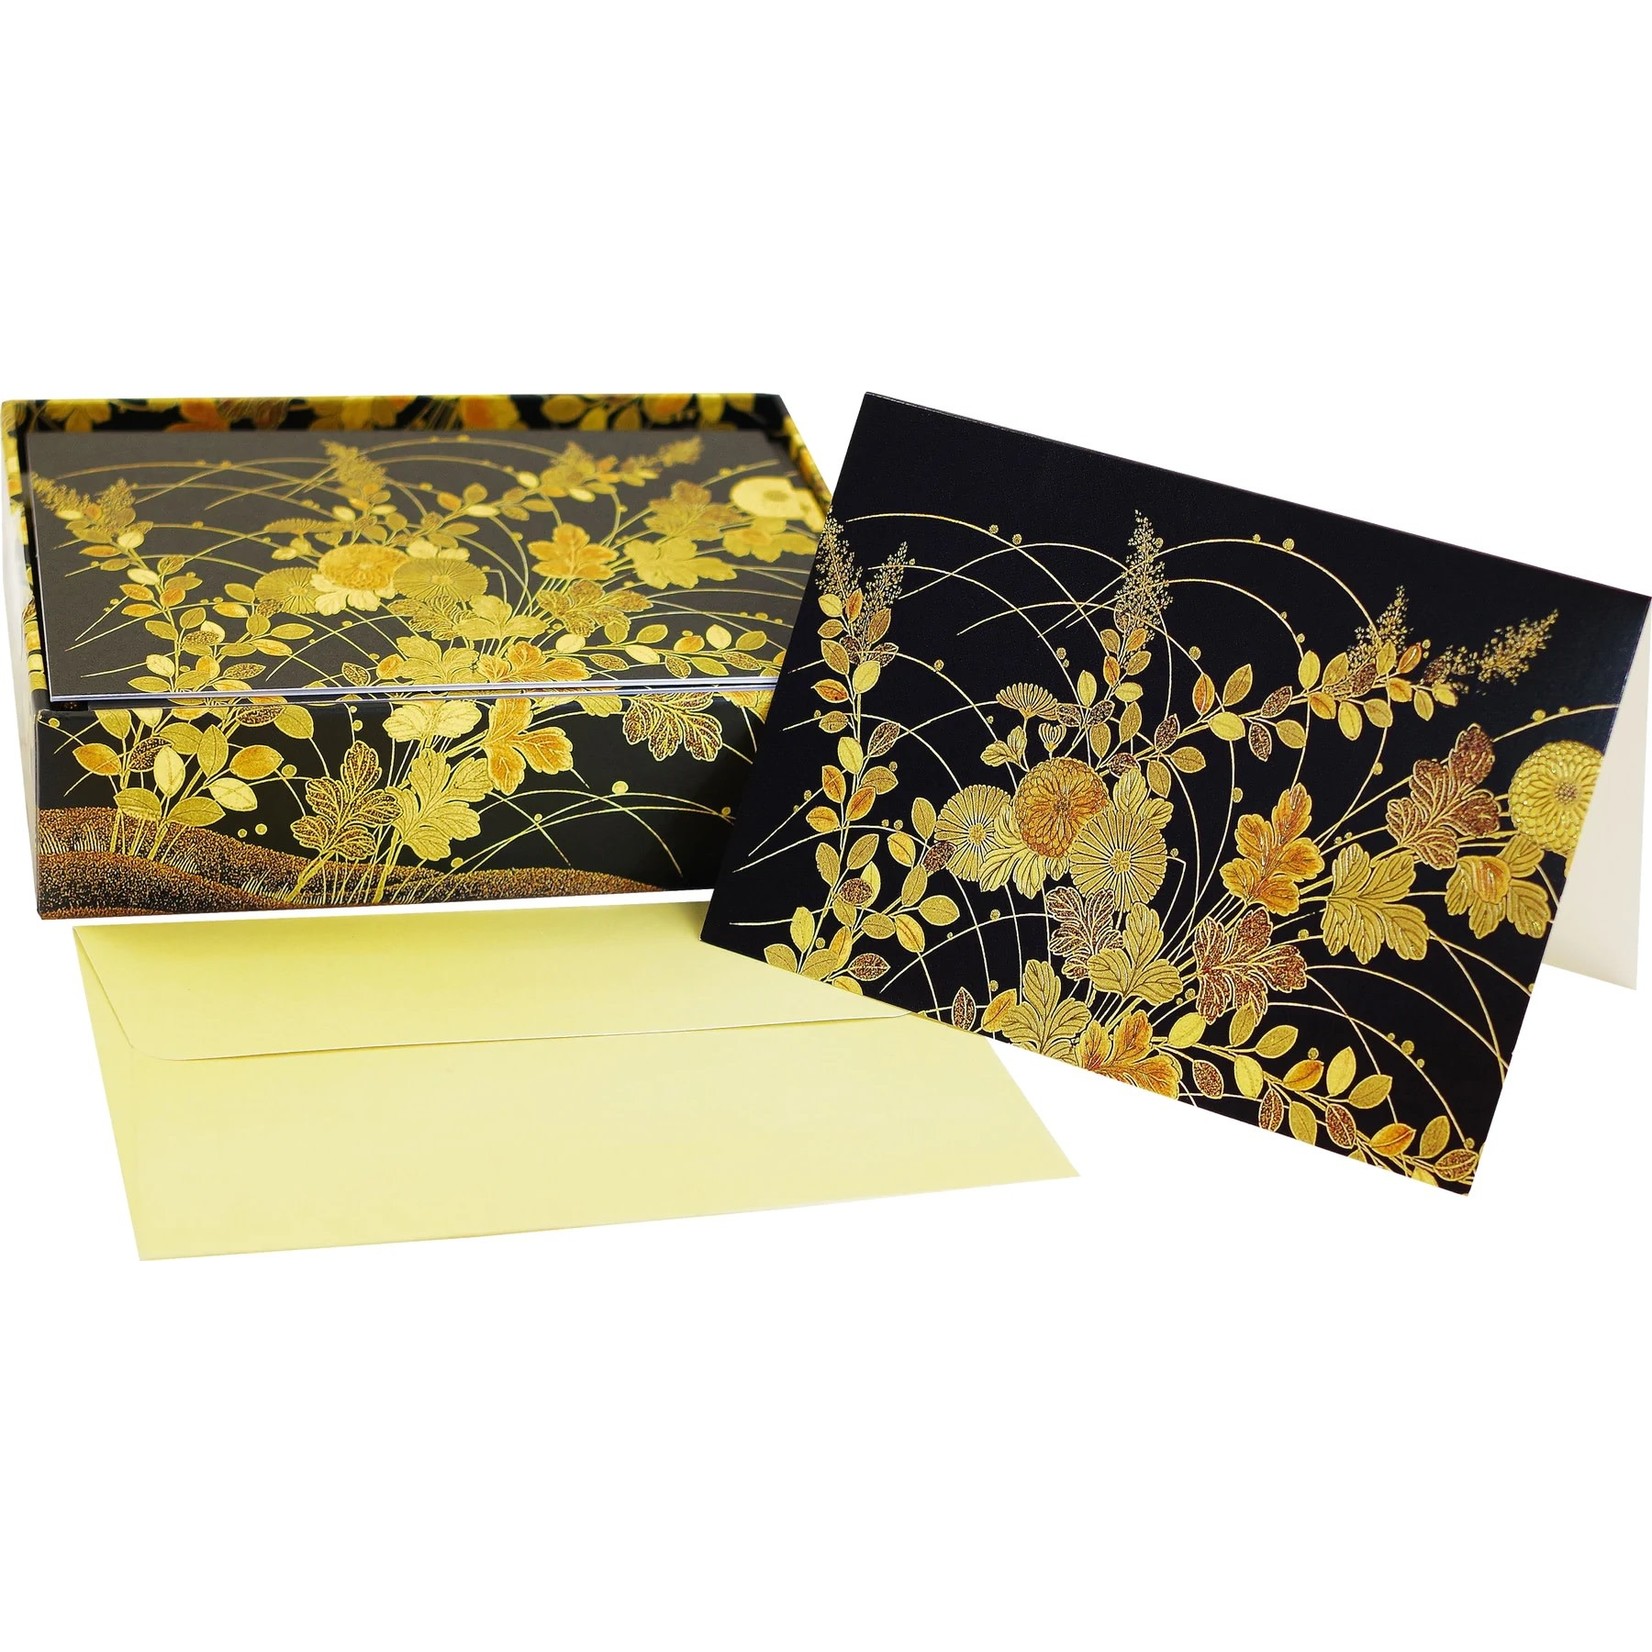 Peter Pauper Press Boxed Note Cards: Autumn Grasses